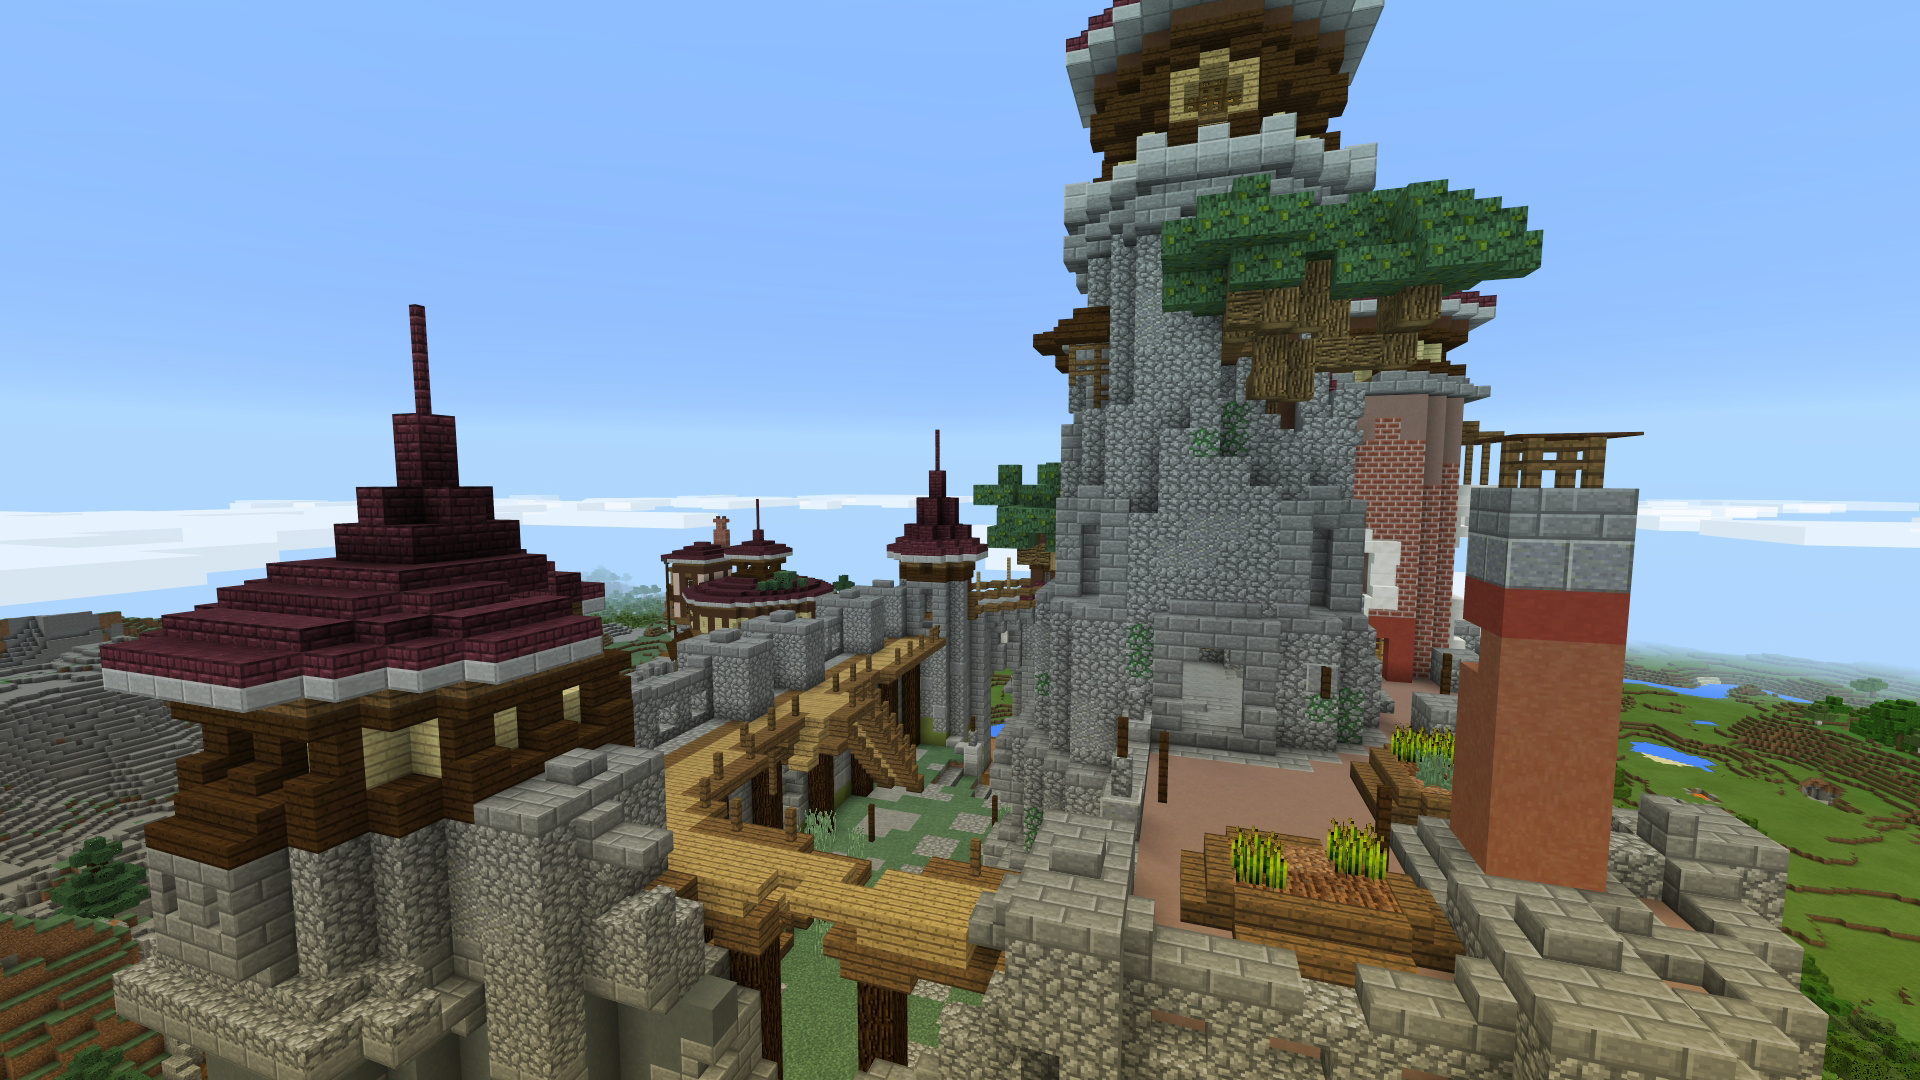 The Fortress in Minecraft Marketplace